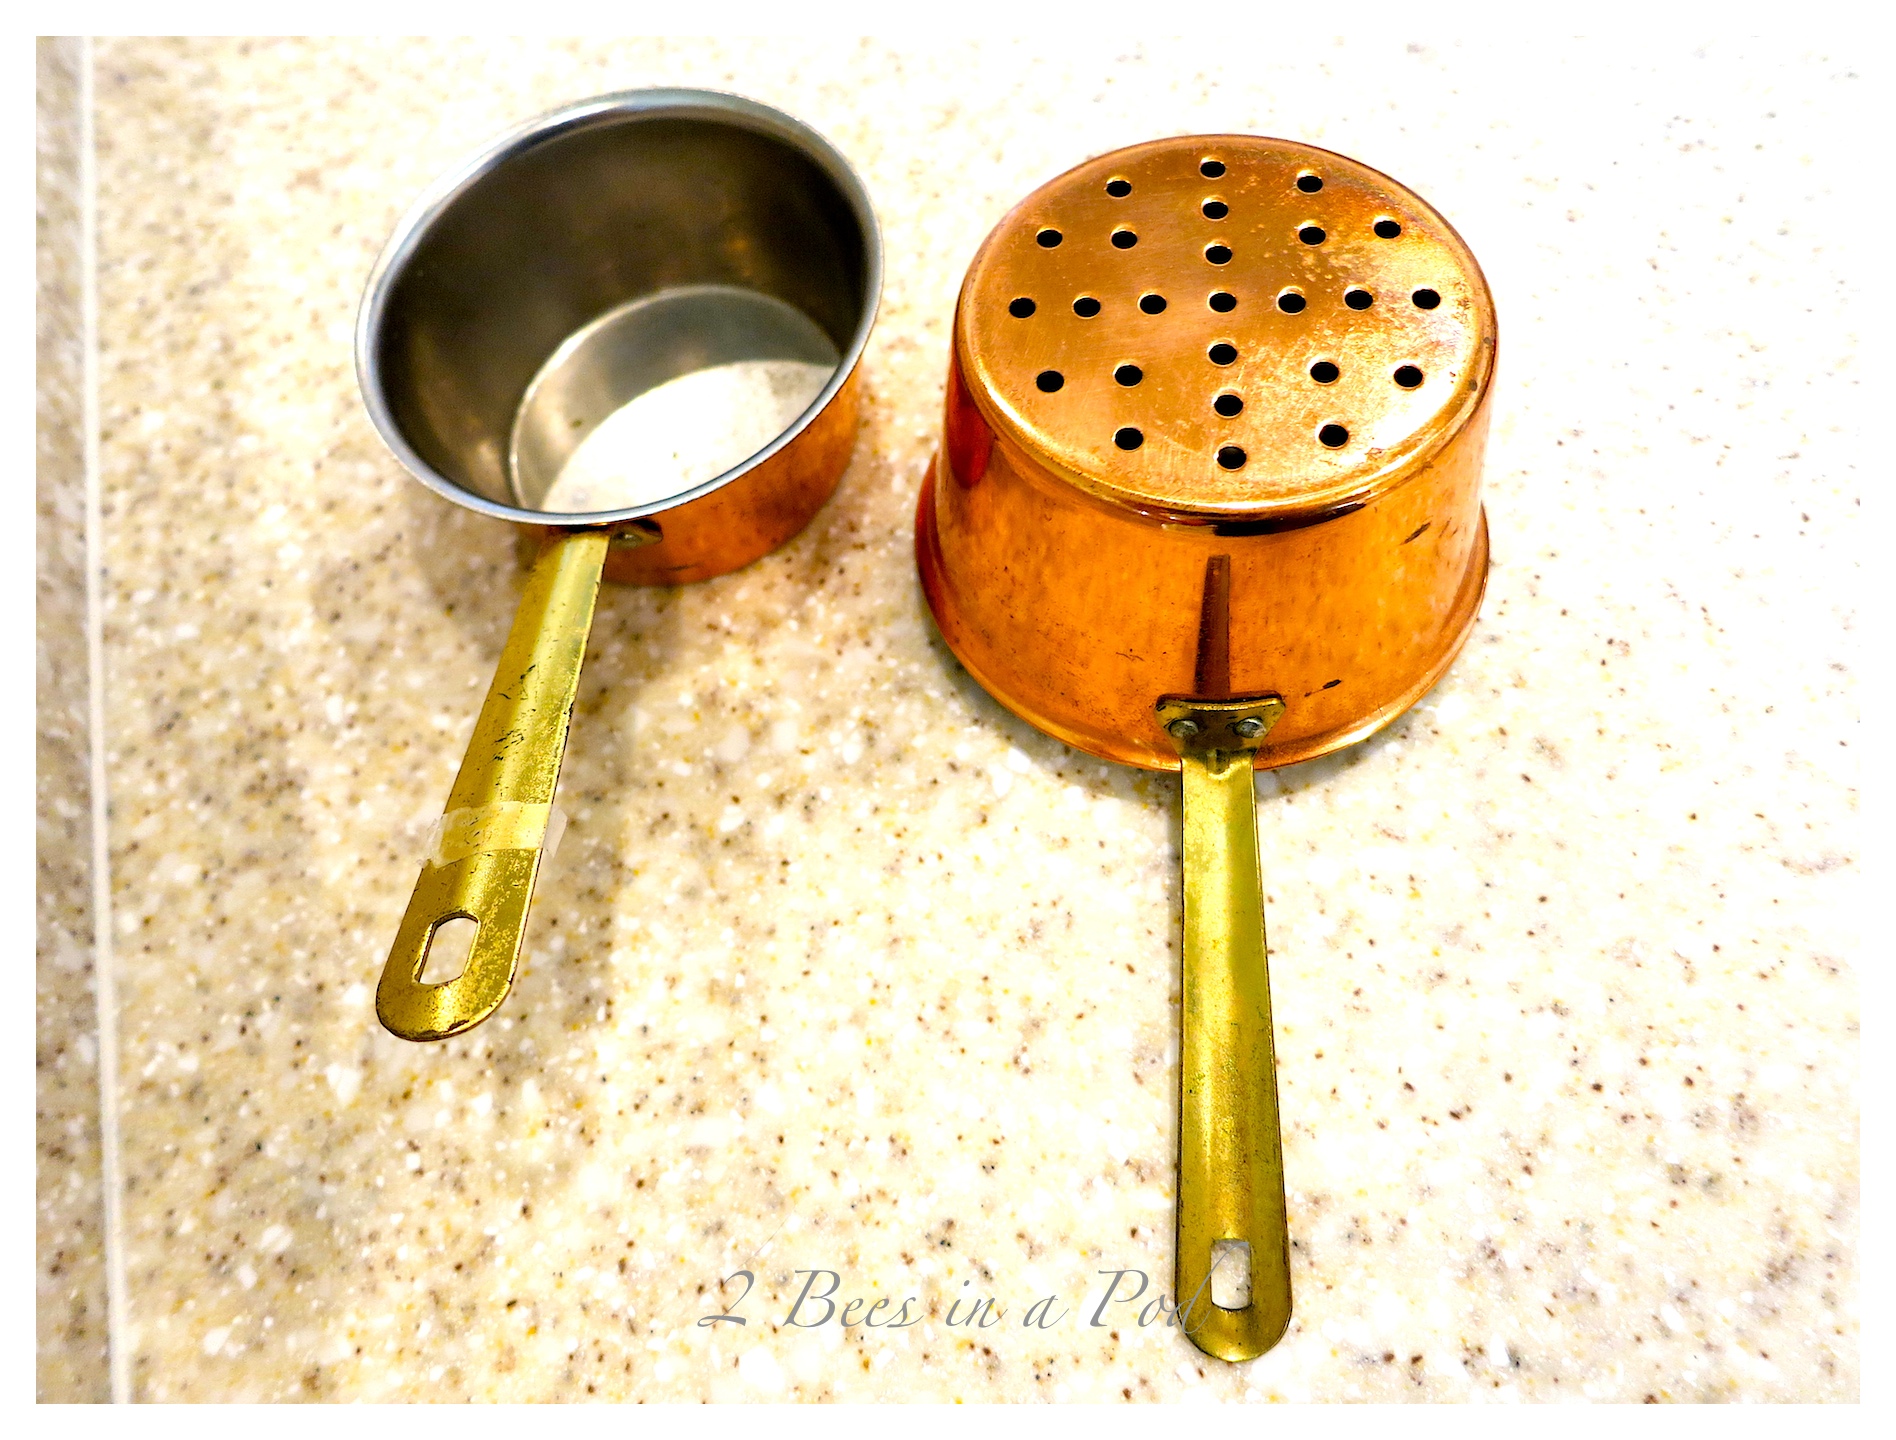 A safe and organic way to clean copper pots and pans. Use lemon and kosher salt to wipe away grime. Shiny and polished!